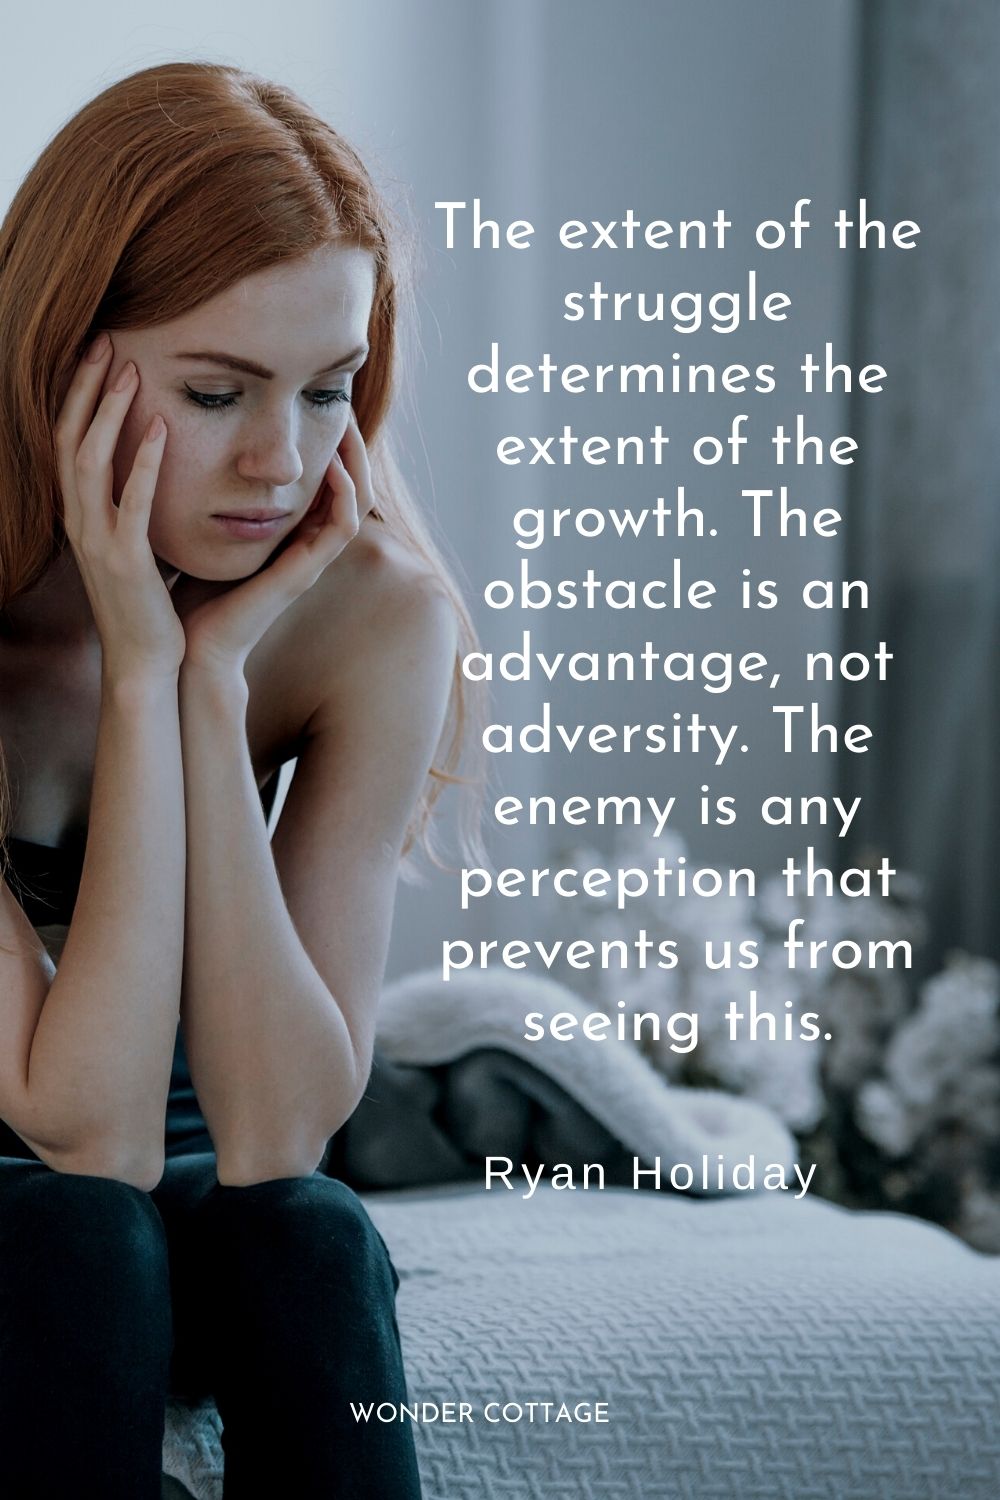 The extent of the struggle determines the extent of the growth. The obstacle is an advantage, not adversity. The enemy is any perception that prevents us from seeing this. Ryan Holiday